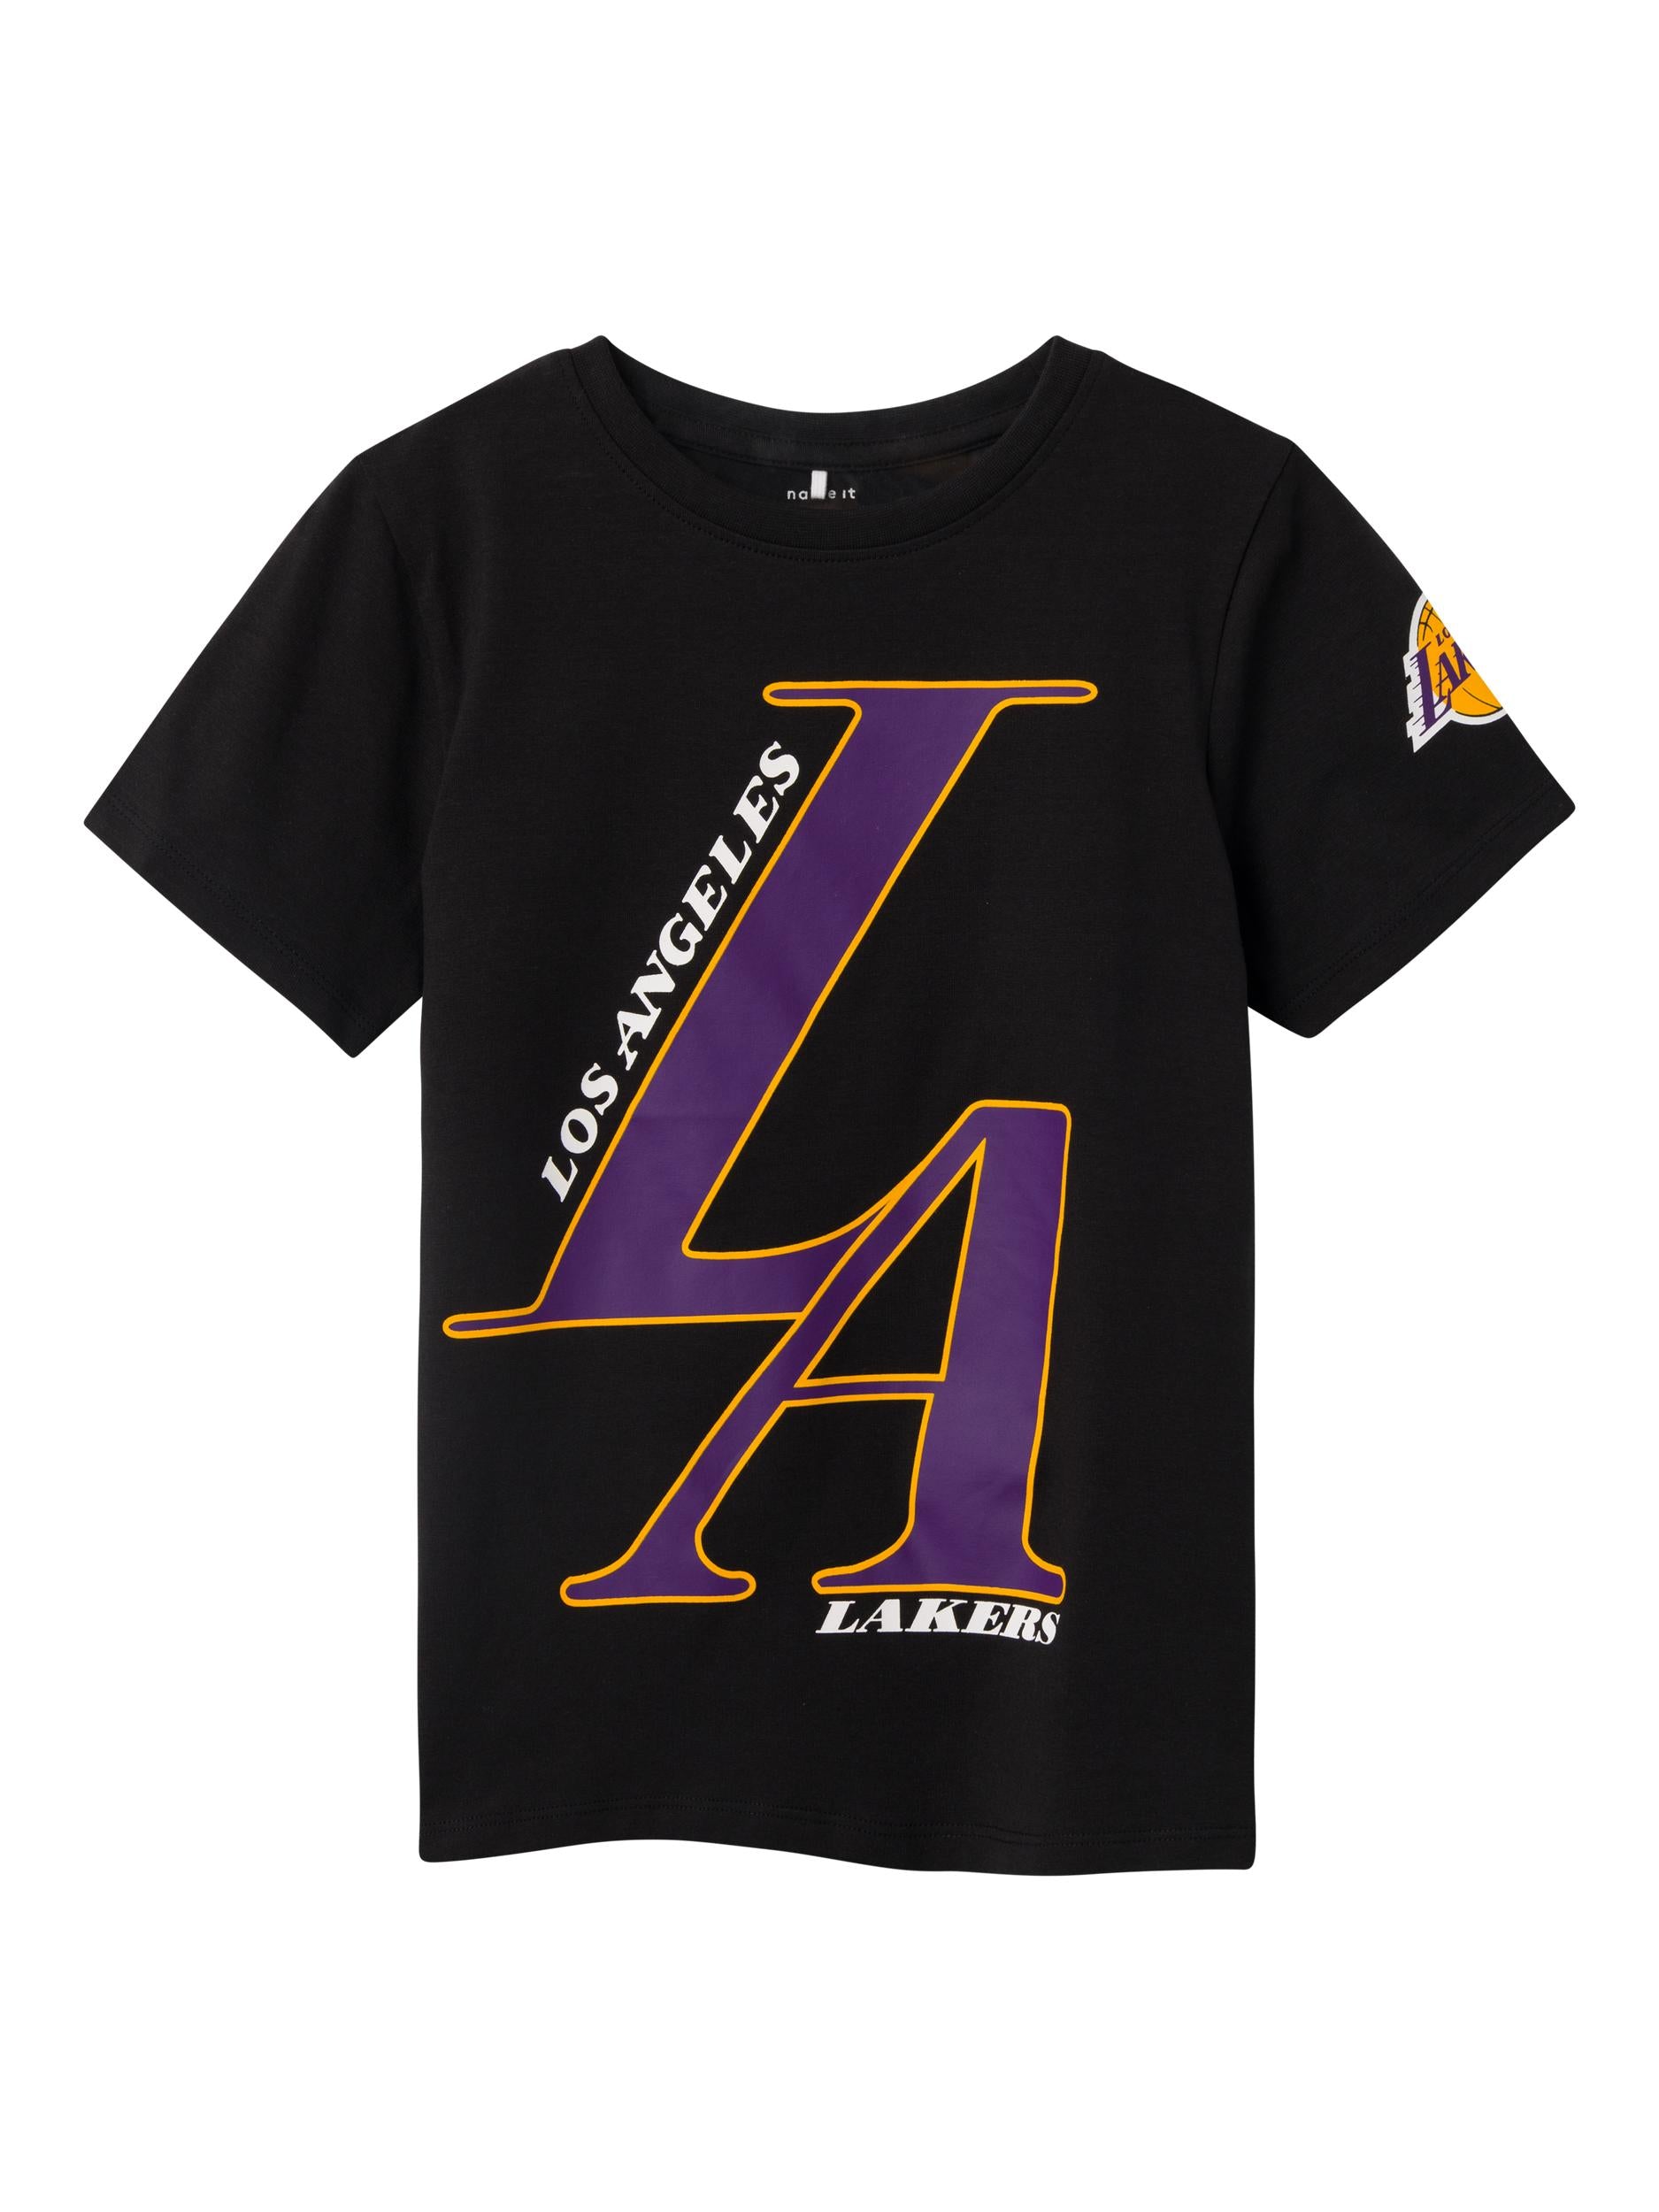 Name It t-shirt kids nero con stampa centrale Lakers